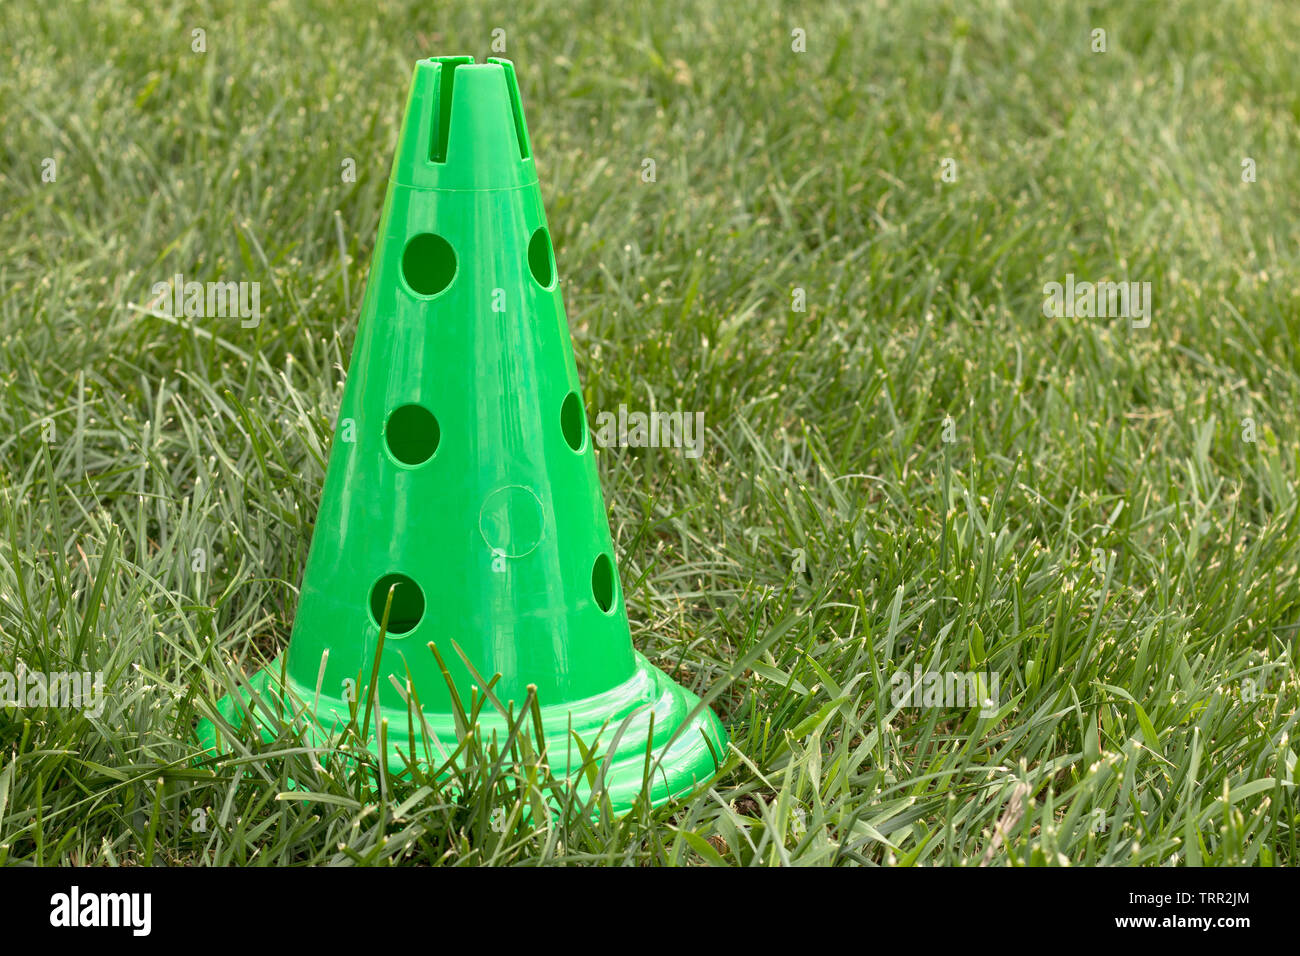 Sports Training Cone, Pitch Marker Cones, Durable Football Training,  Traffic